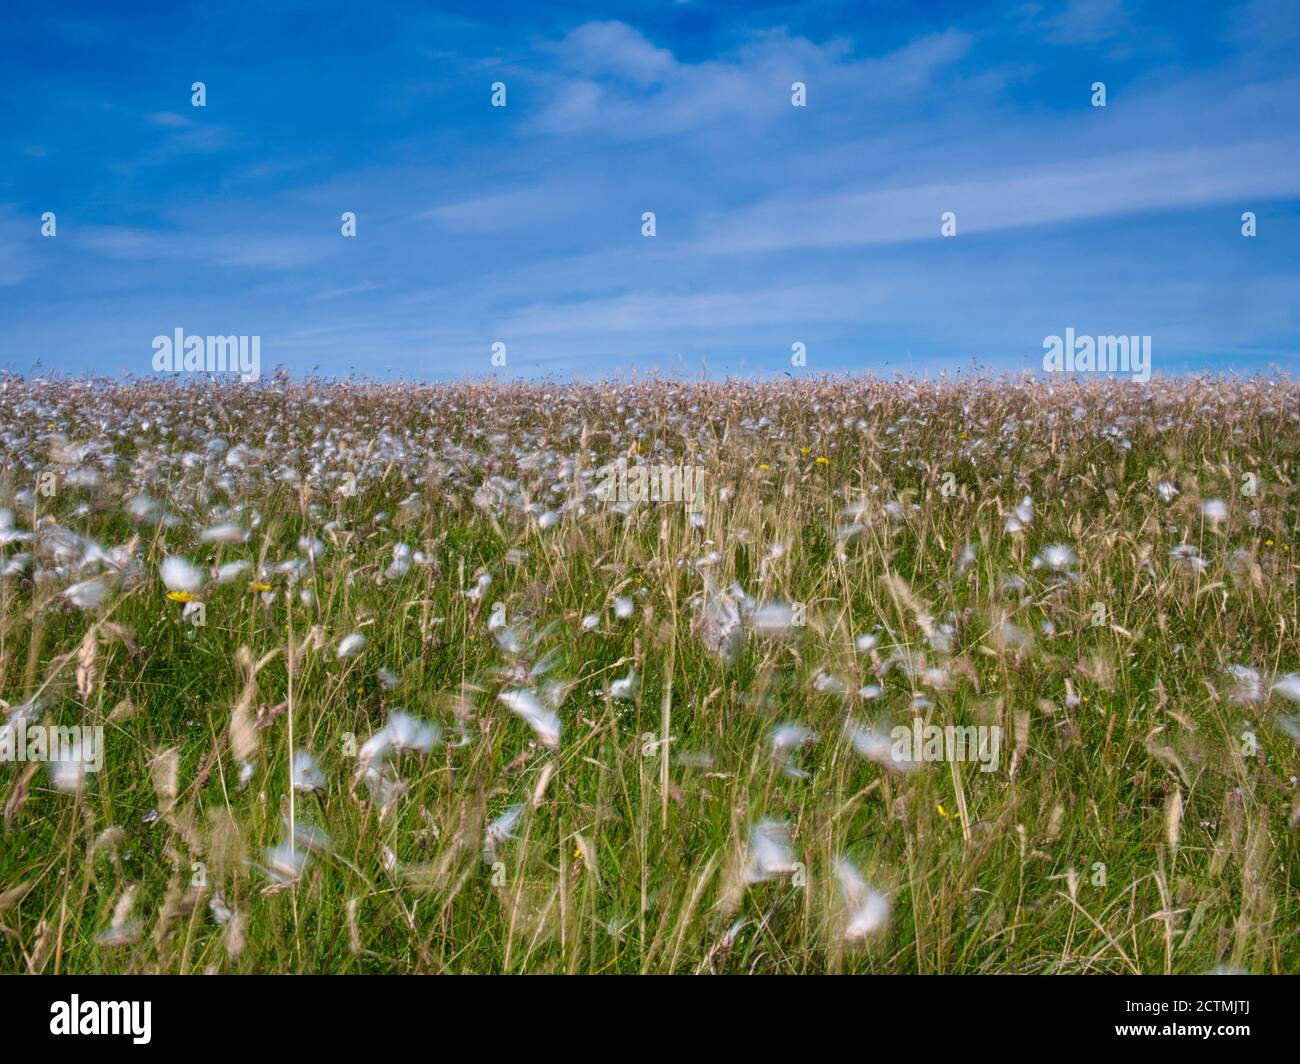 With a long exposure to produce a motion blur, a view of white cotton grass flowers blowing in the wind on Shetland, Scotland, UK Stock Photo